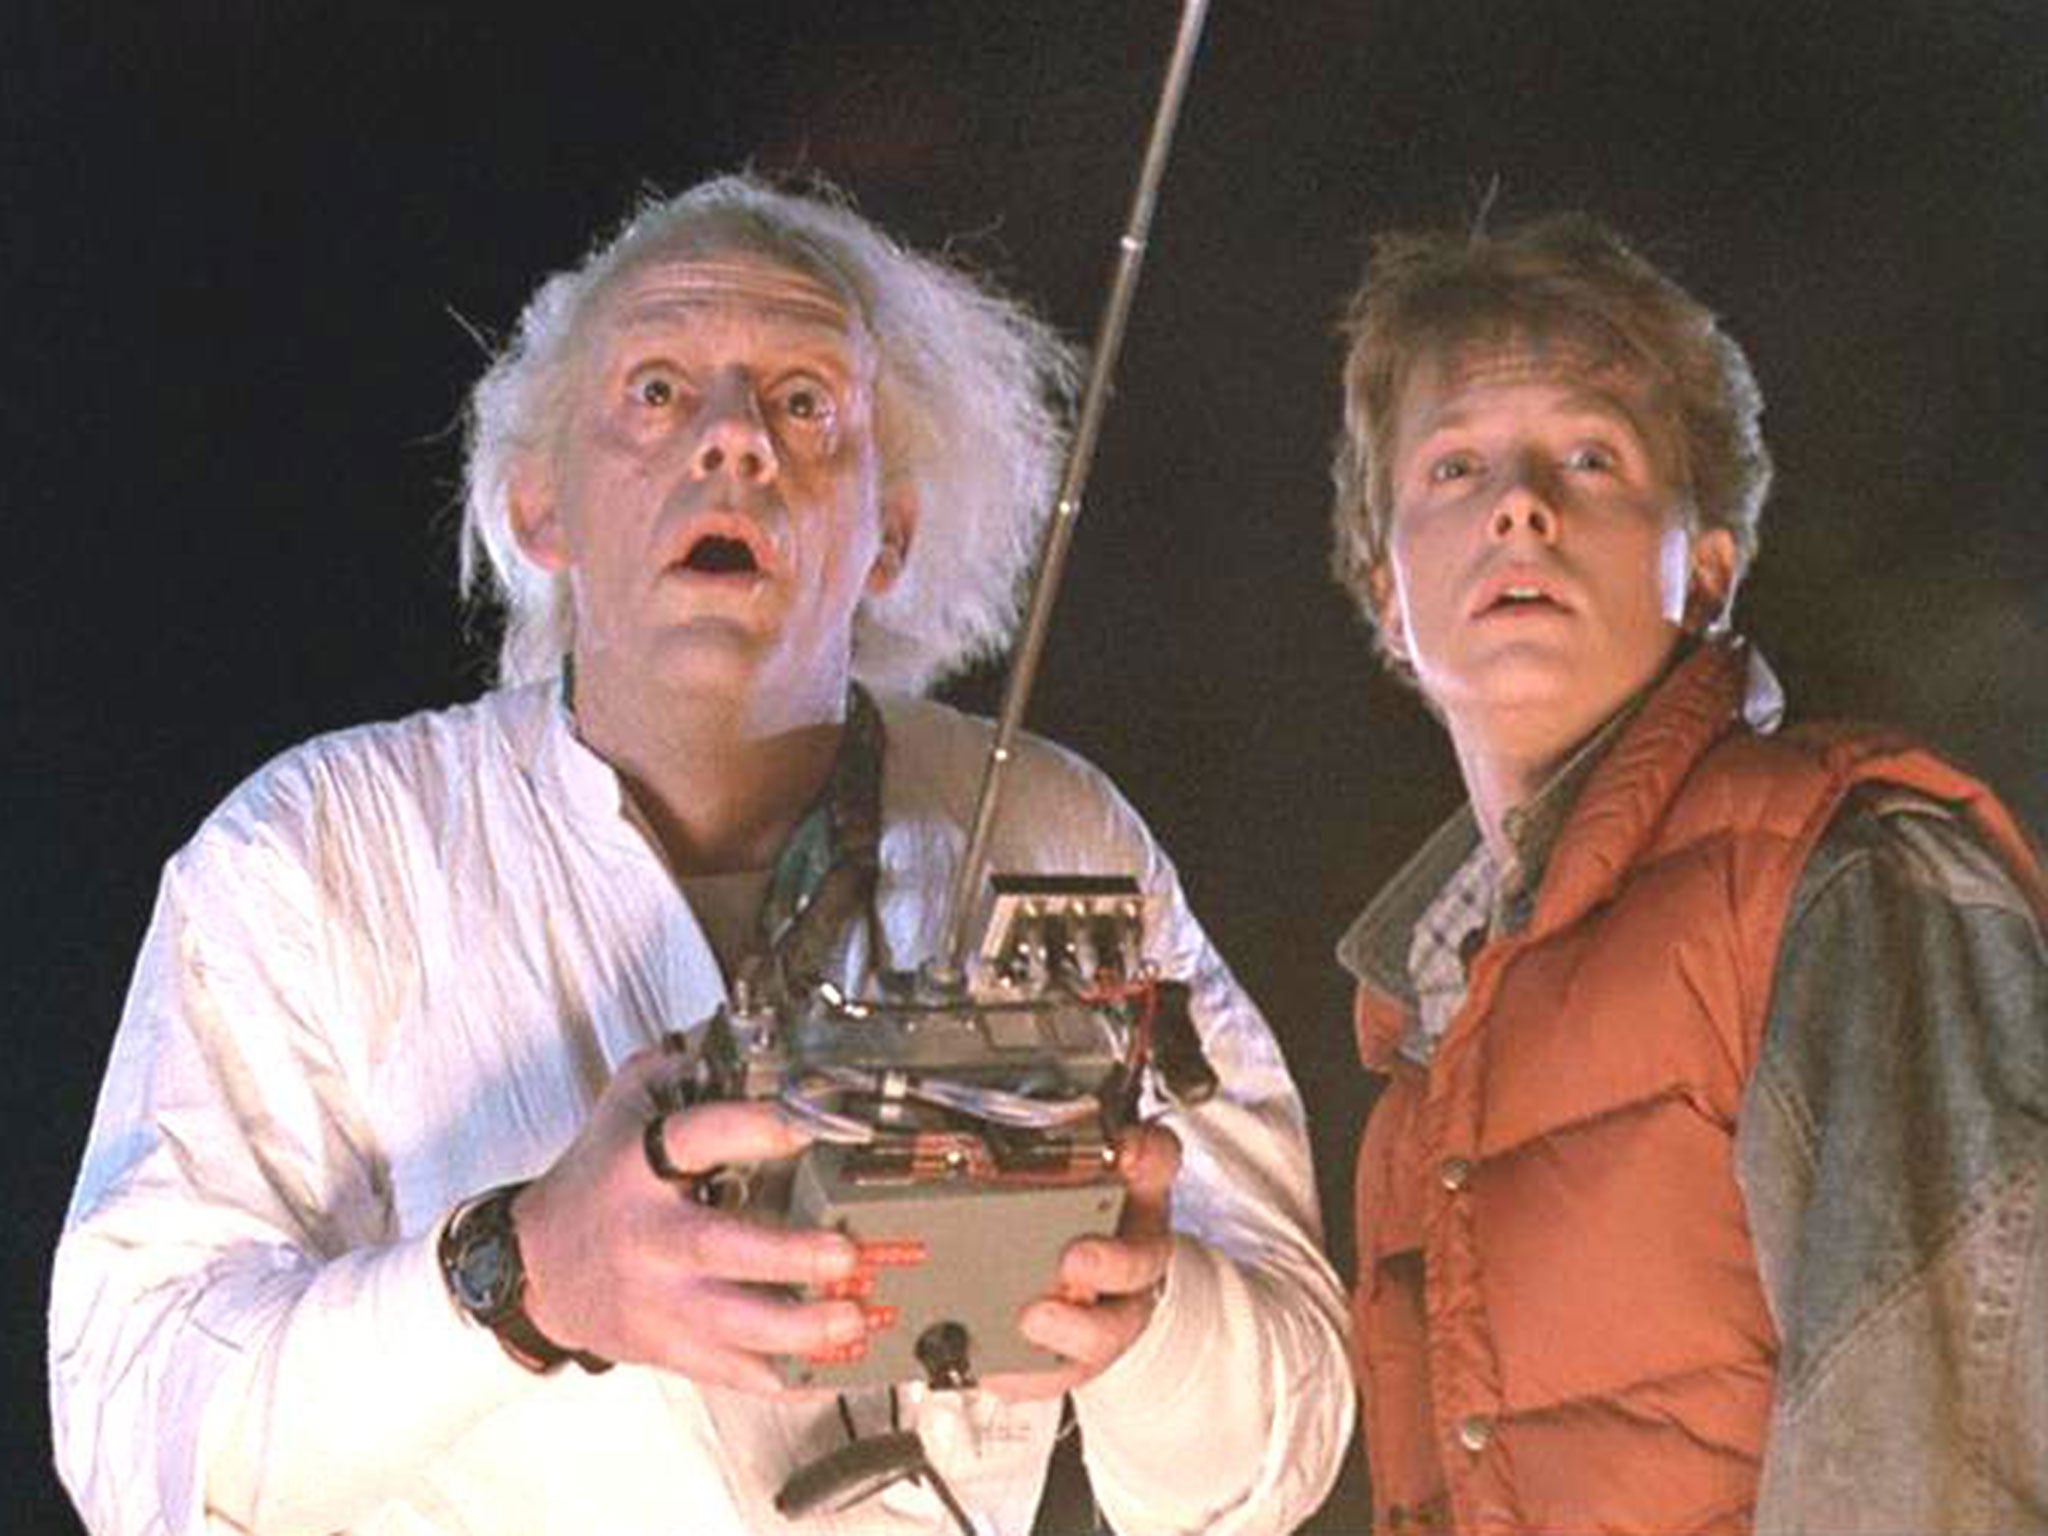 Christopher Lloyd plays eccentric scientist Doc Brown in 1985's Back to the Future